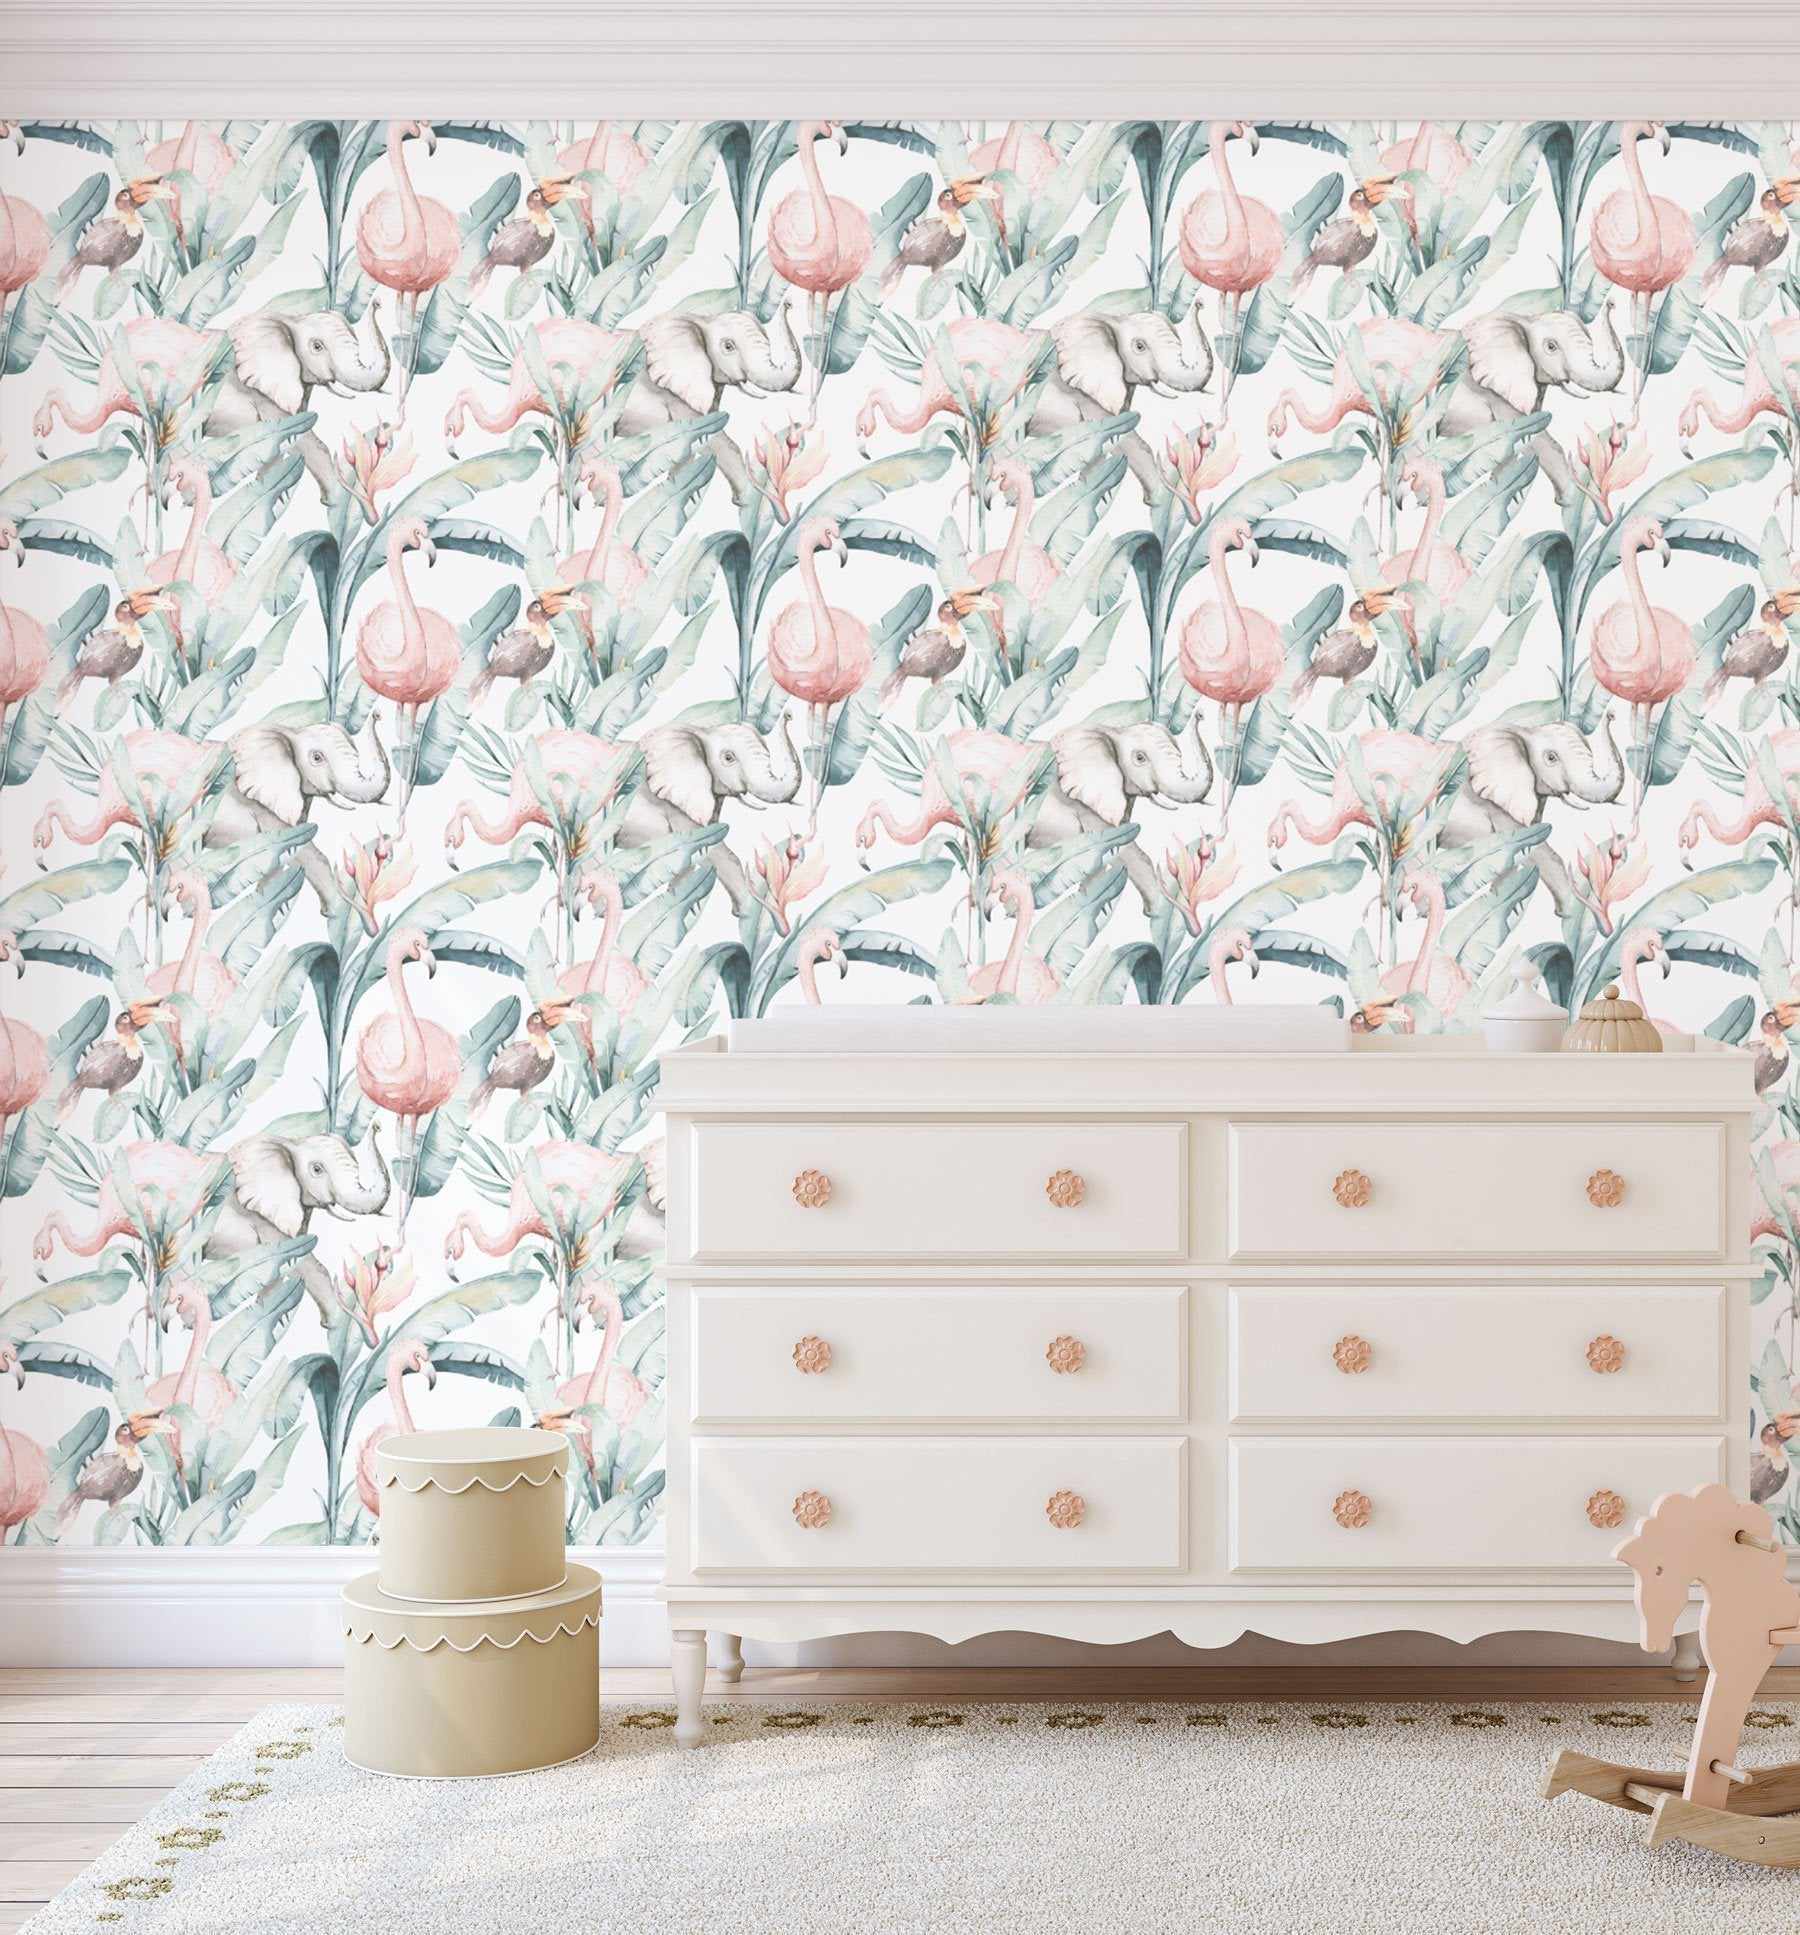 Pink Floral Hand Painted Wallpaper / Peel and Stick Wallpaper Removabl 